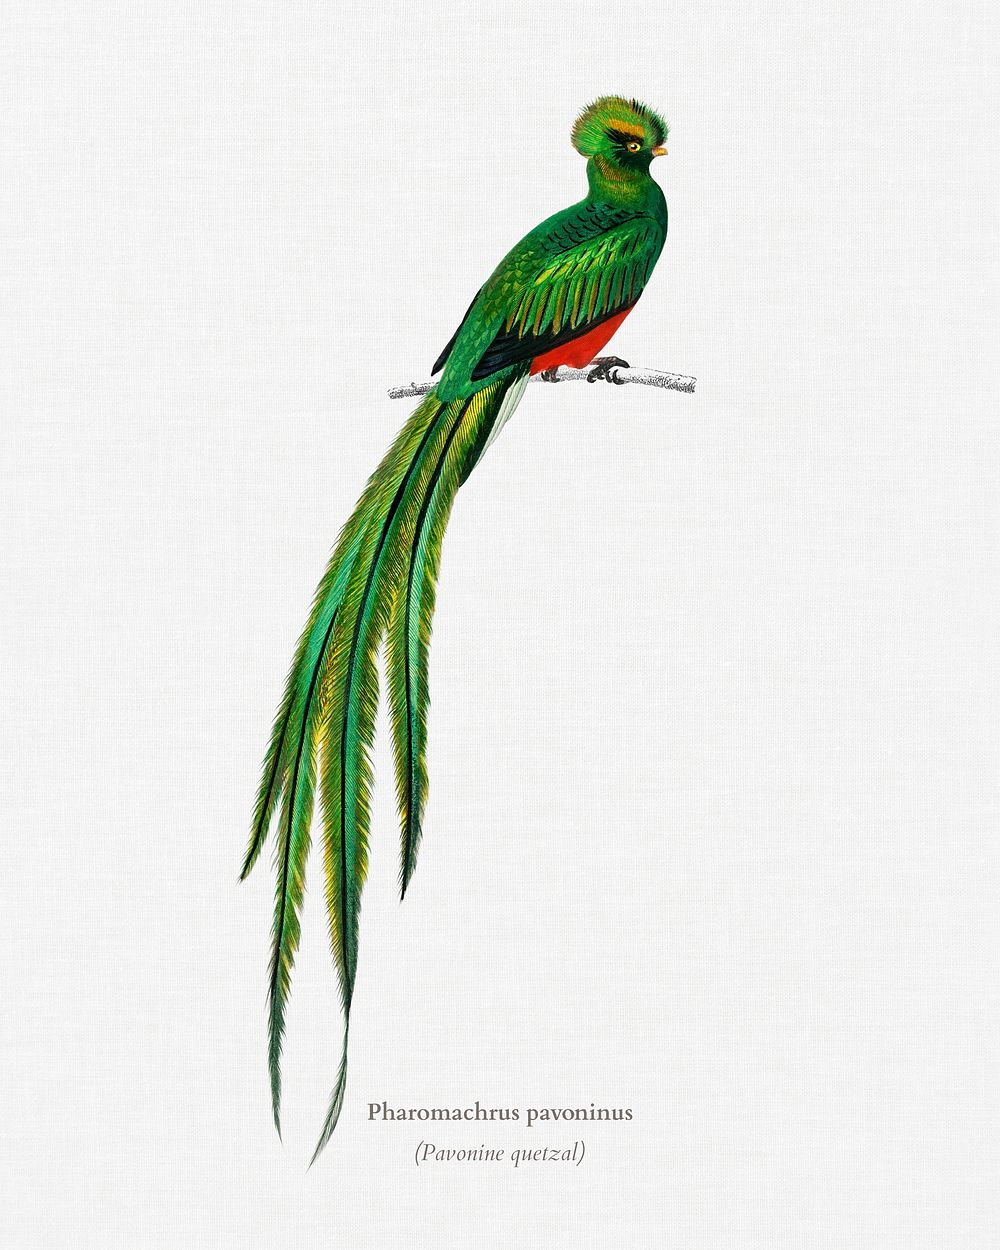 Pavonine quetzal (Pharomachrus pavoninus) illustrated by Charles Dessalines D' Orbigny (1806-1876). Digitally enhanced from…